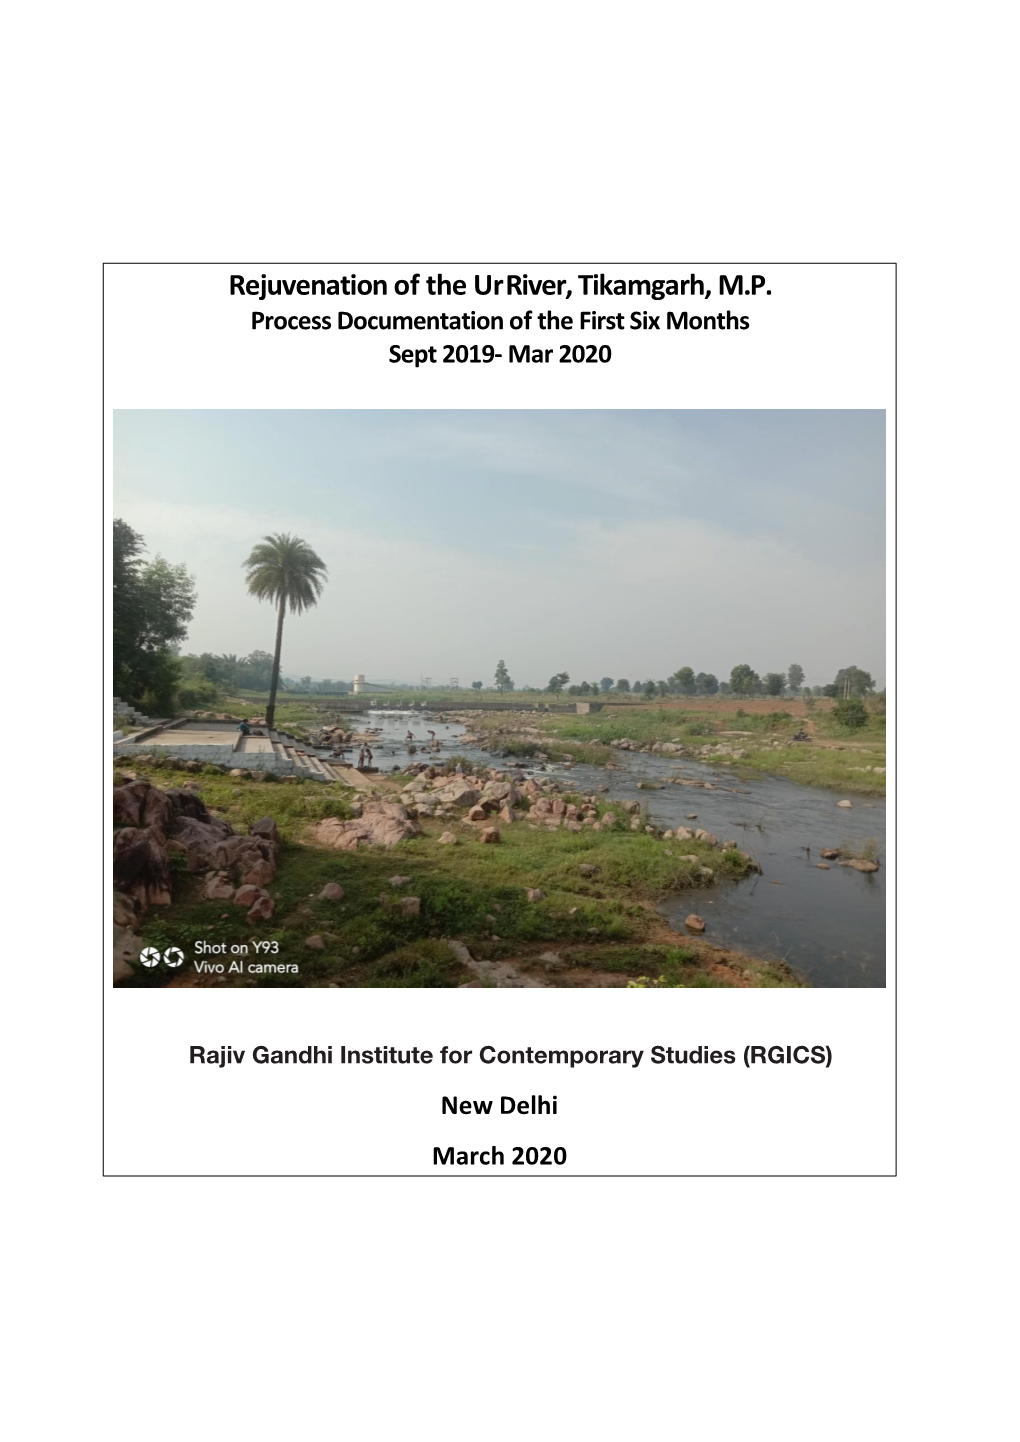 Rejuvenation of the Ur River, Tikamgarh, M.P. Process Documentation of the First Six Months Sept 2019- Mar 2020